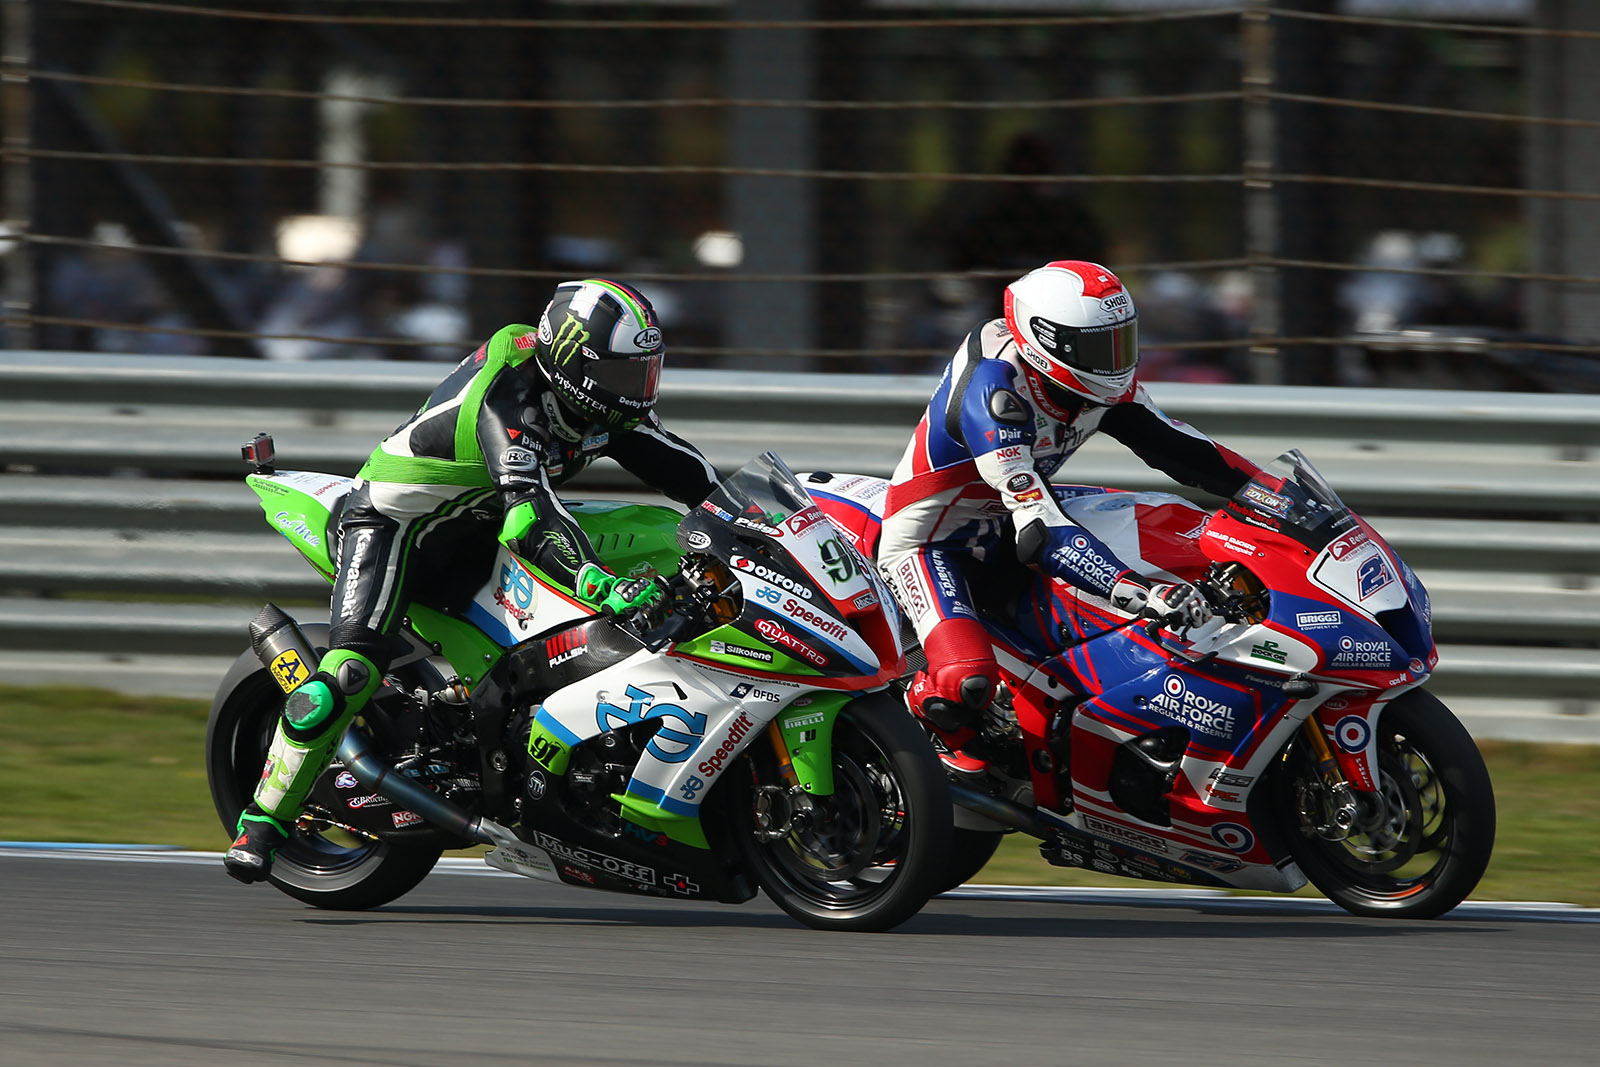 British Superbike Series Concludes With Triple Header Finale This Coming Weekend At Brands